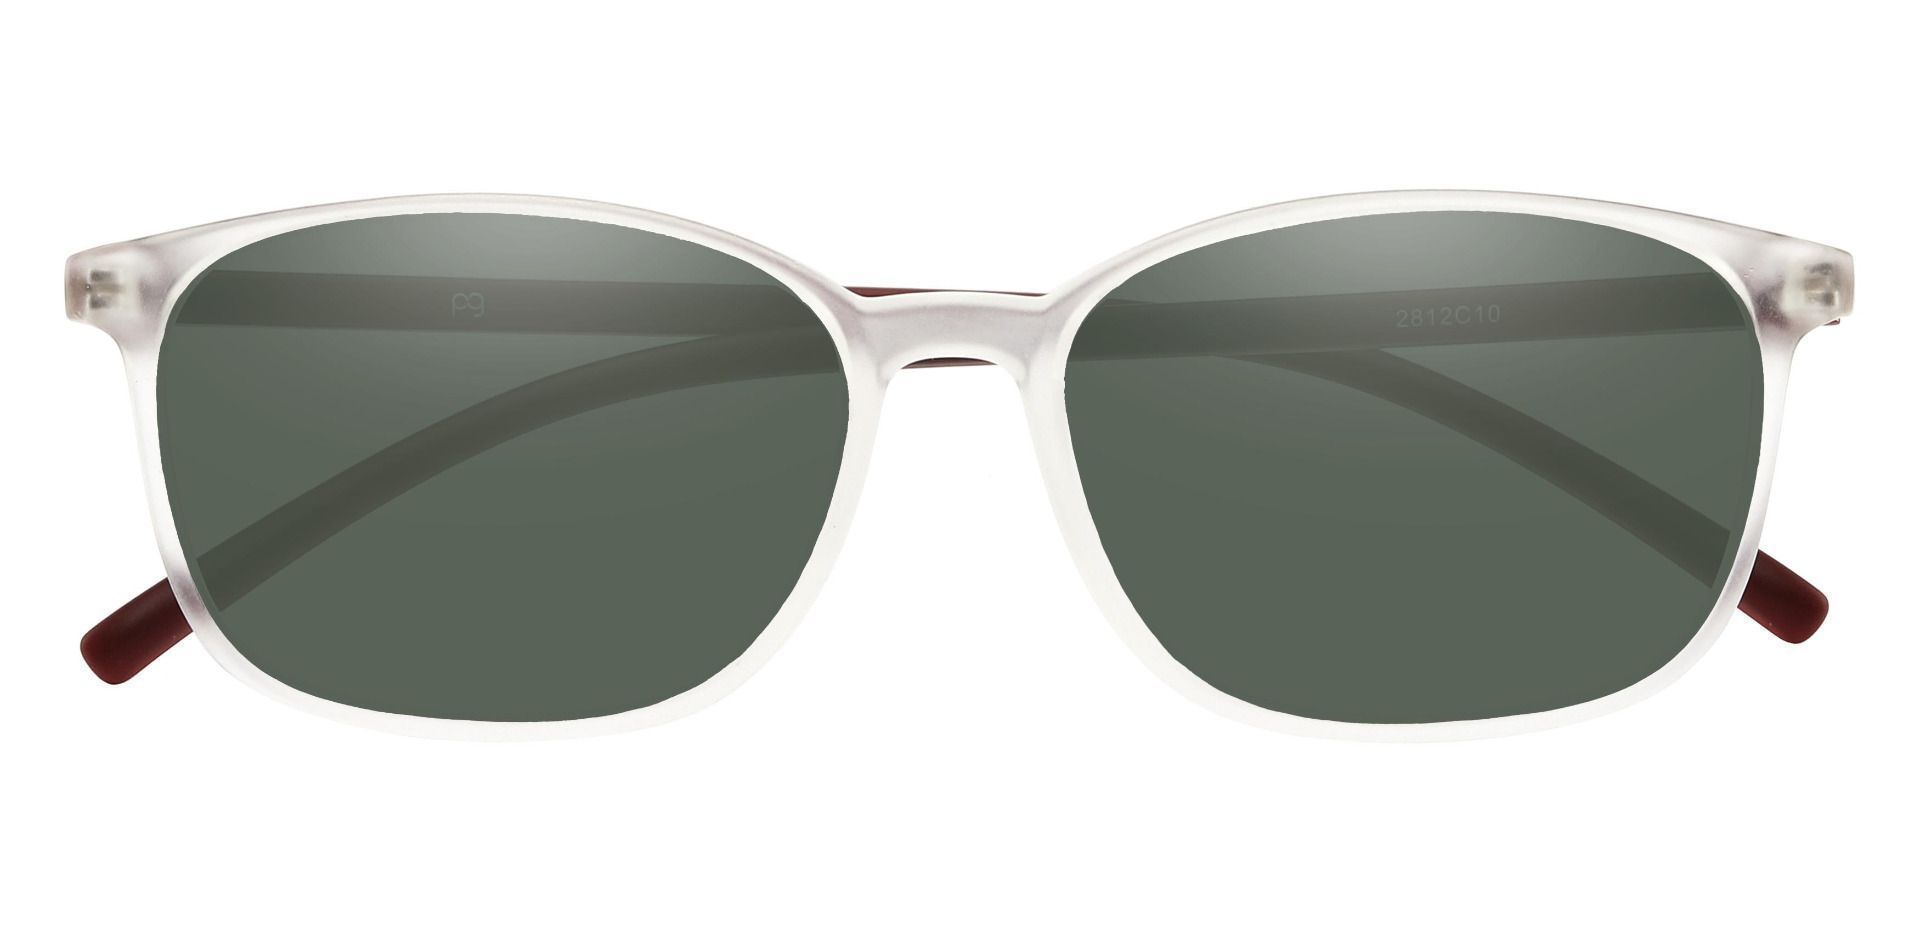 Onyx Square Reading Sunglasses - Clear Frame With Green Lenses